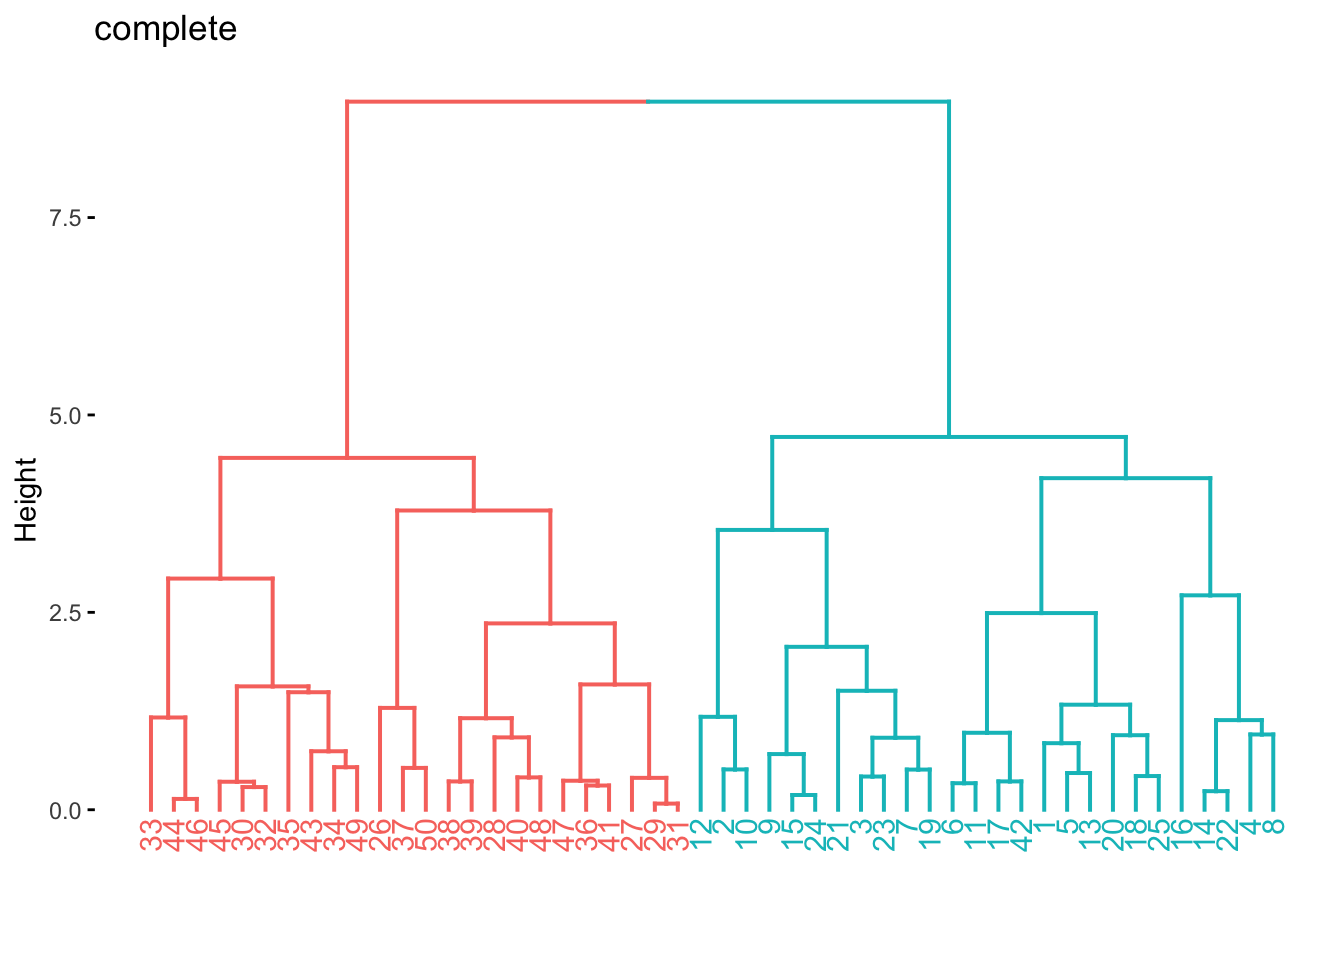 Dendrogram visualization. Both left and right side looks more or less even.